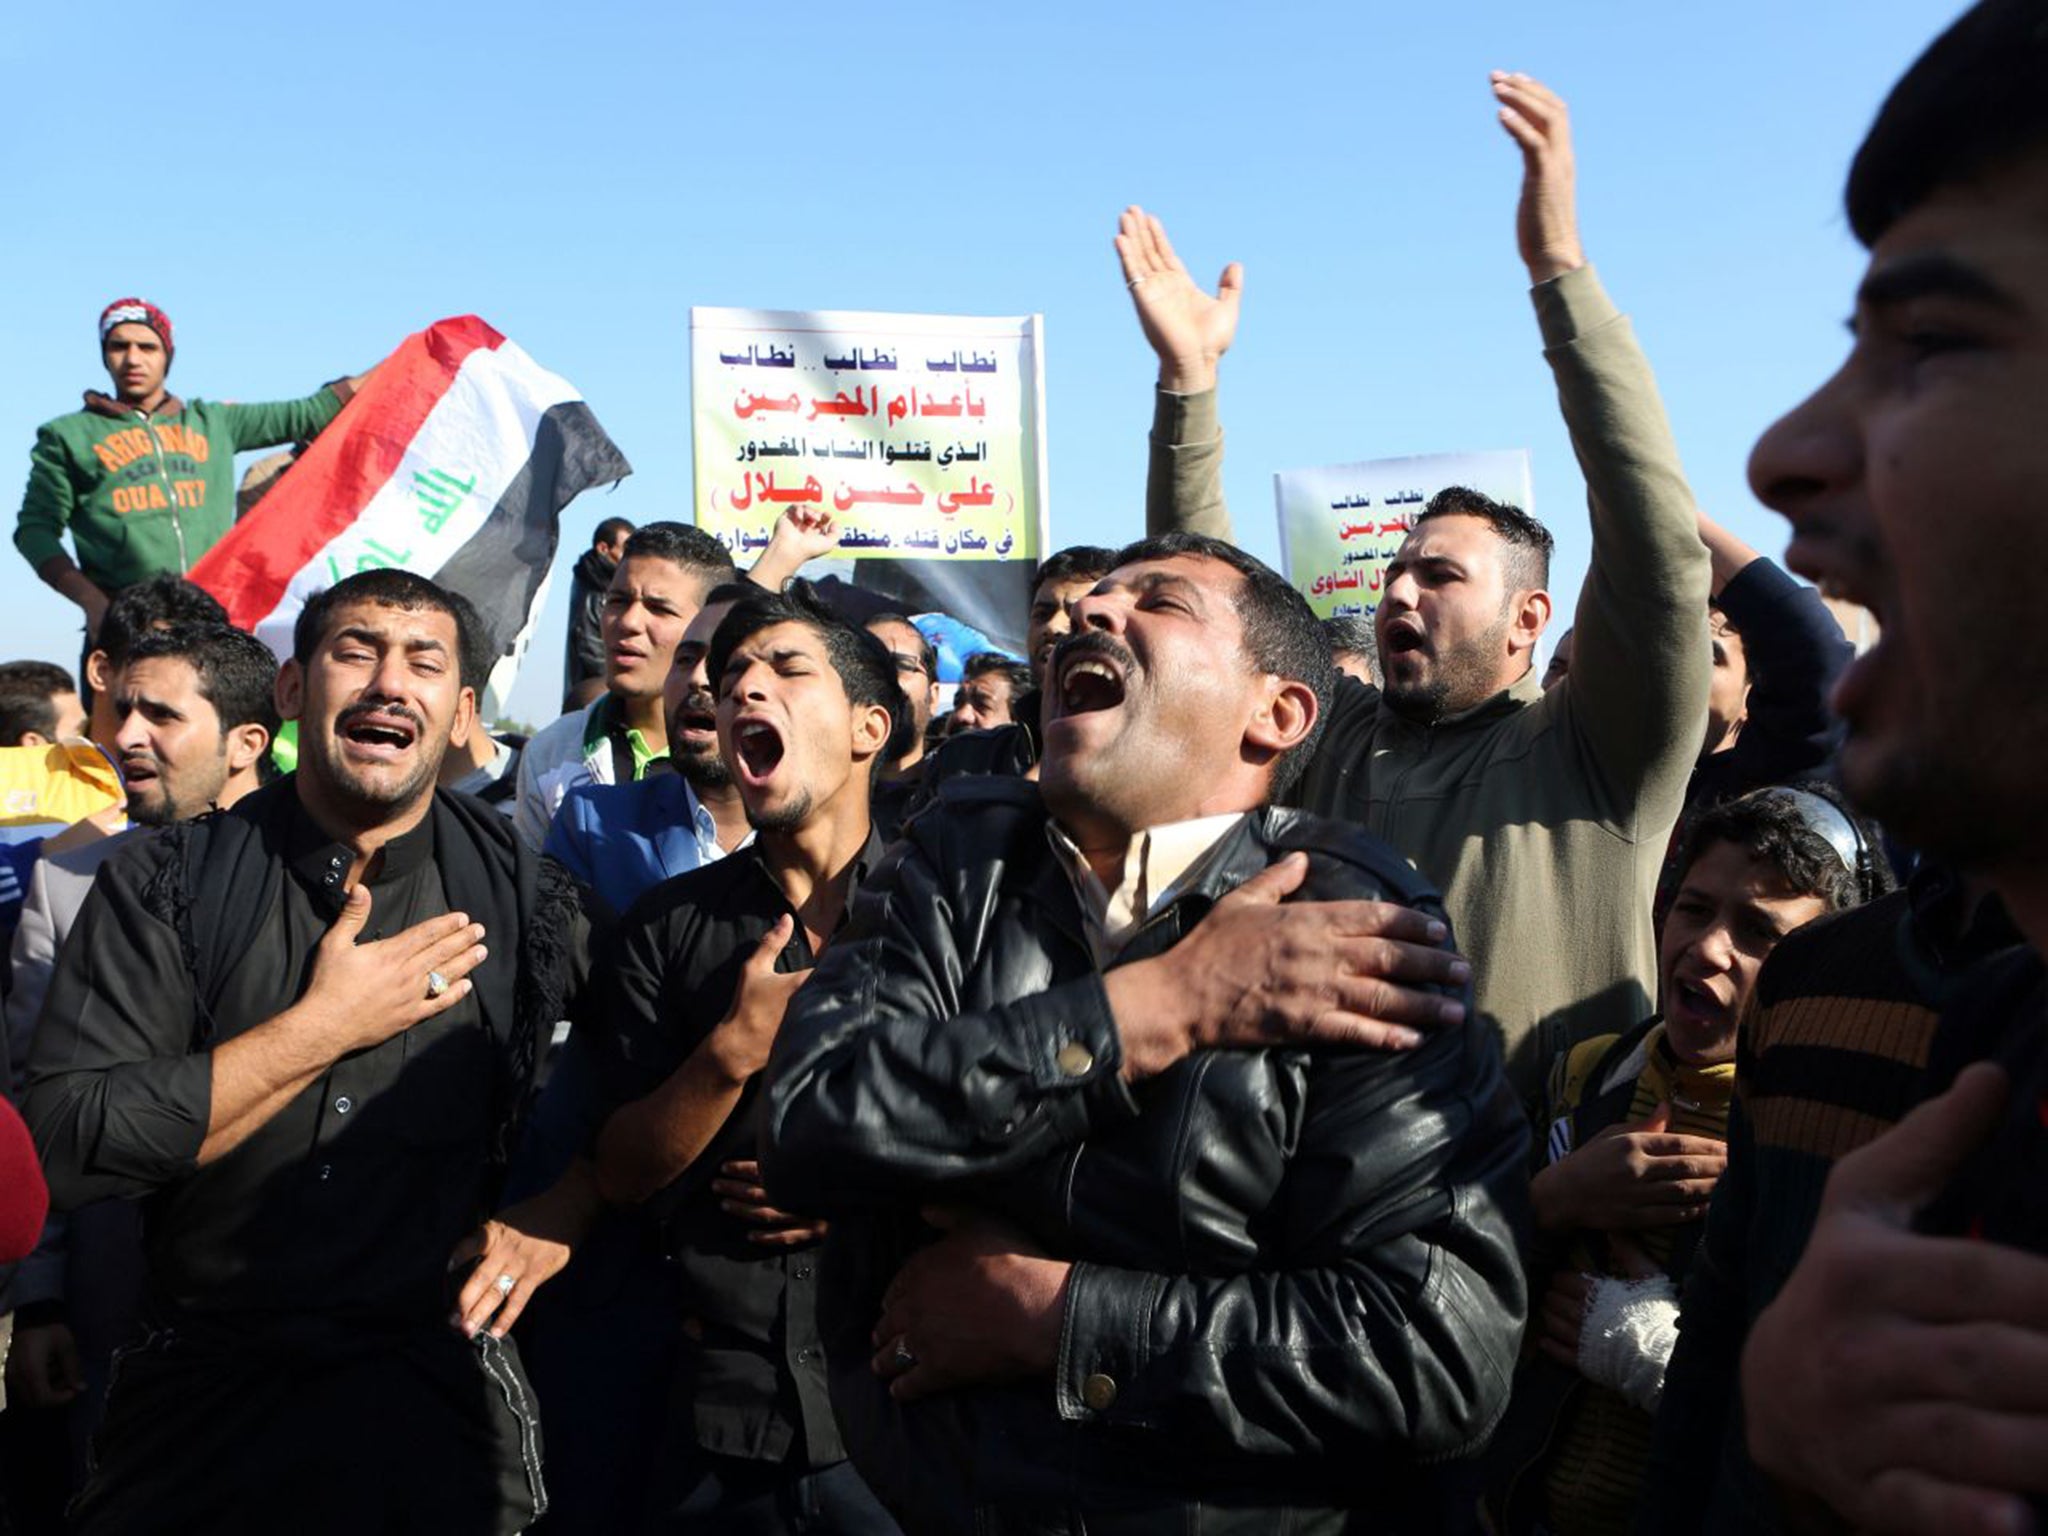 Victims of crime vent their anger at a rally in Basra